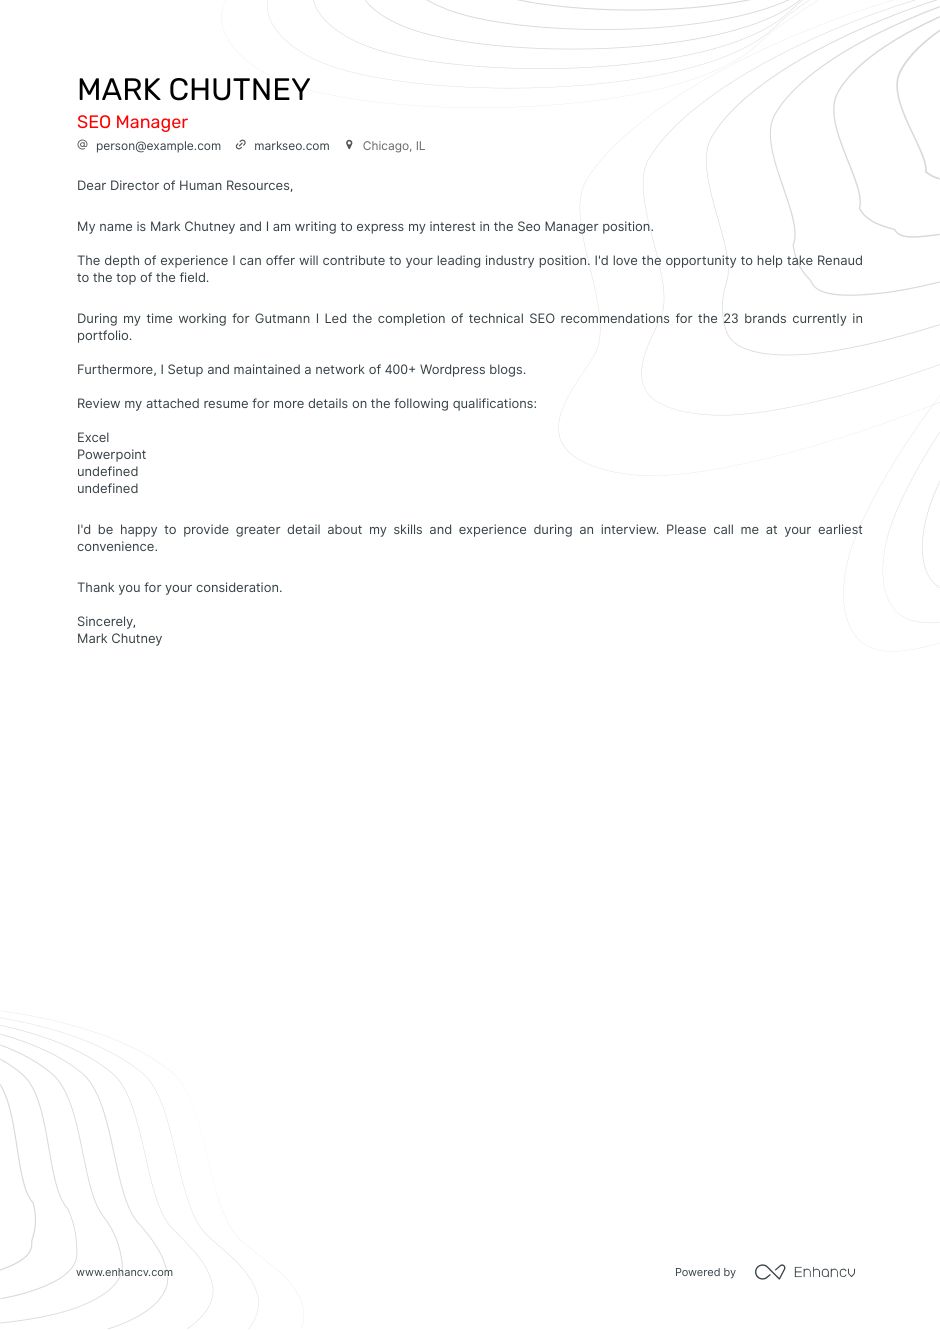 seo-manager-coverletter.png